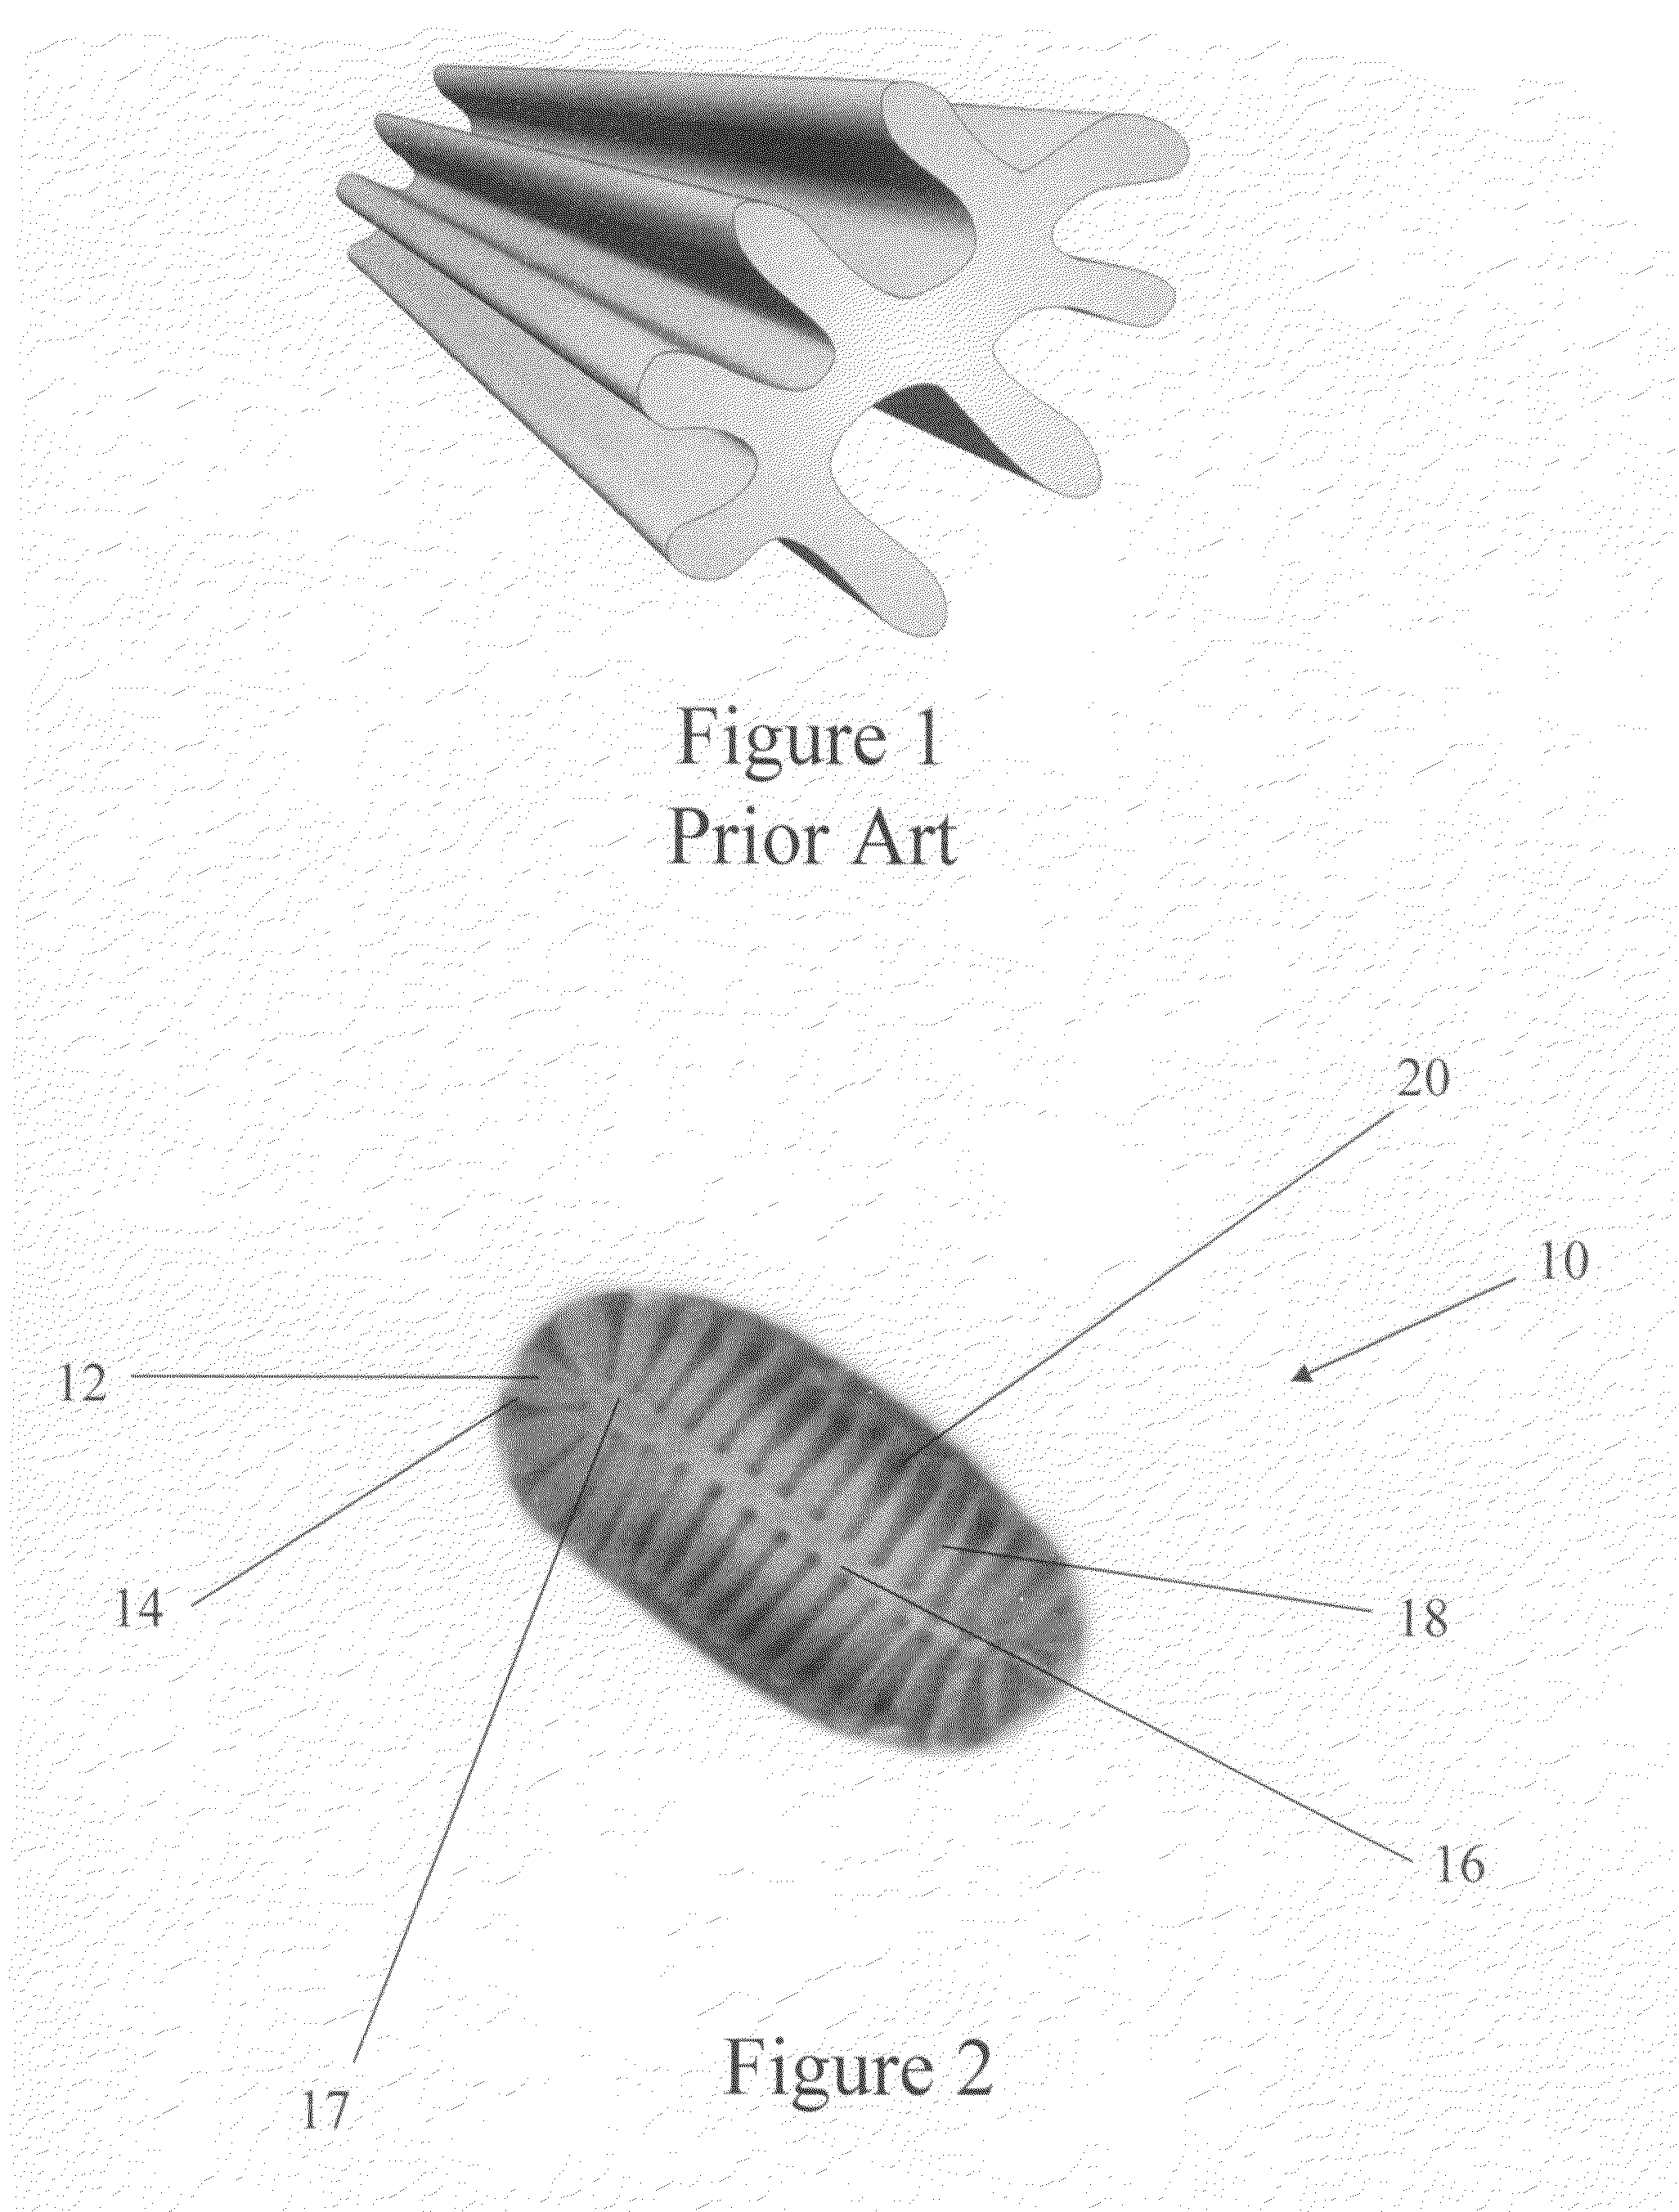 Composite filter media with high surface area fibers